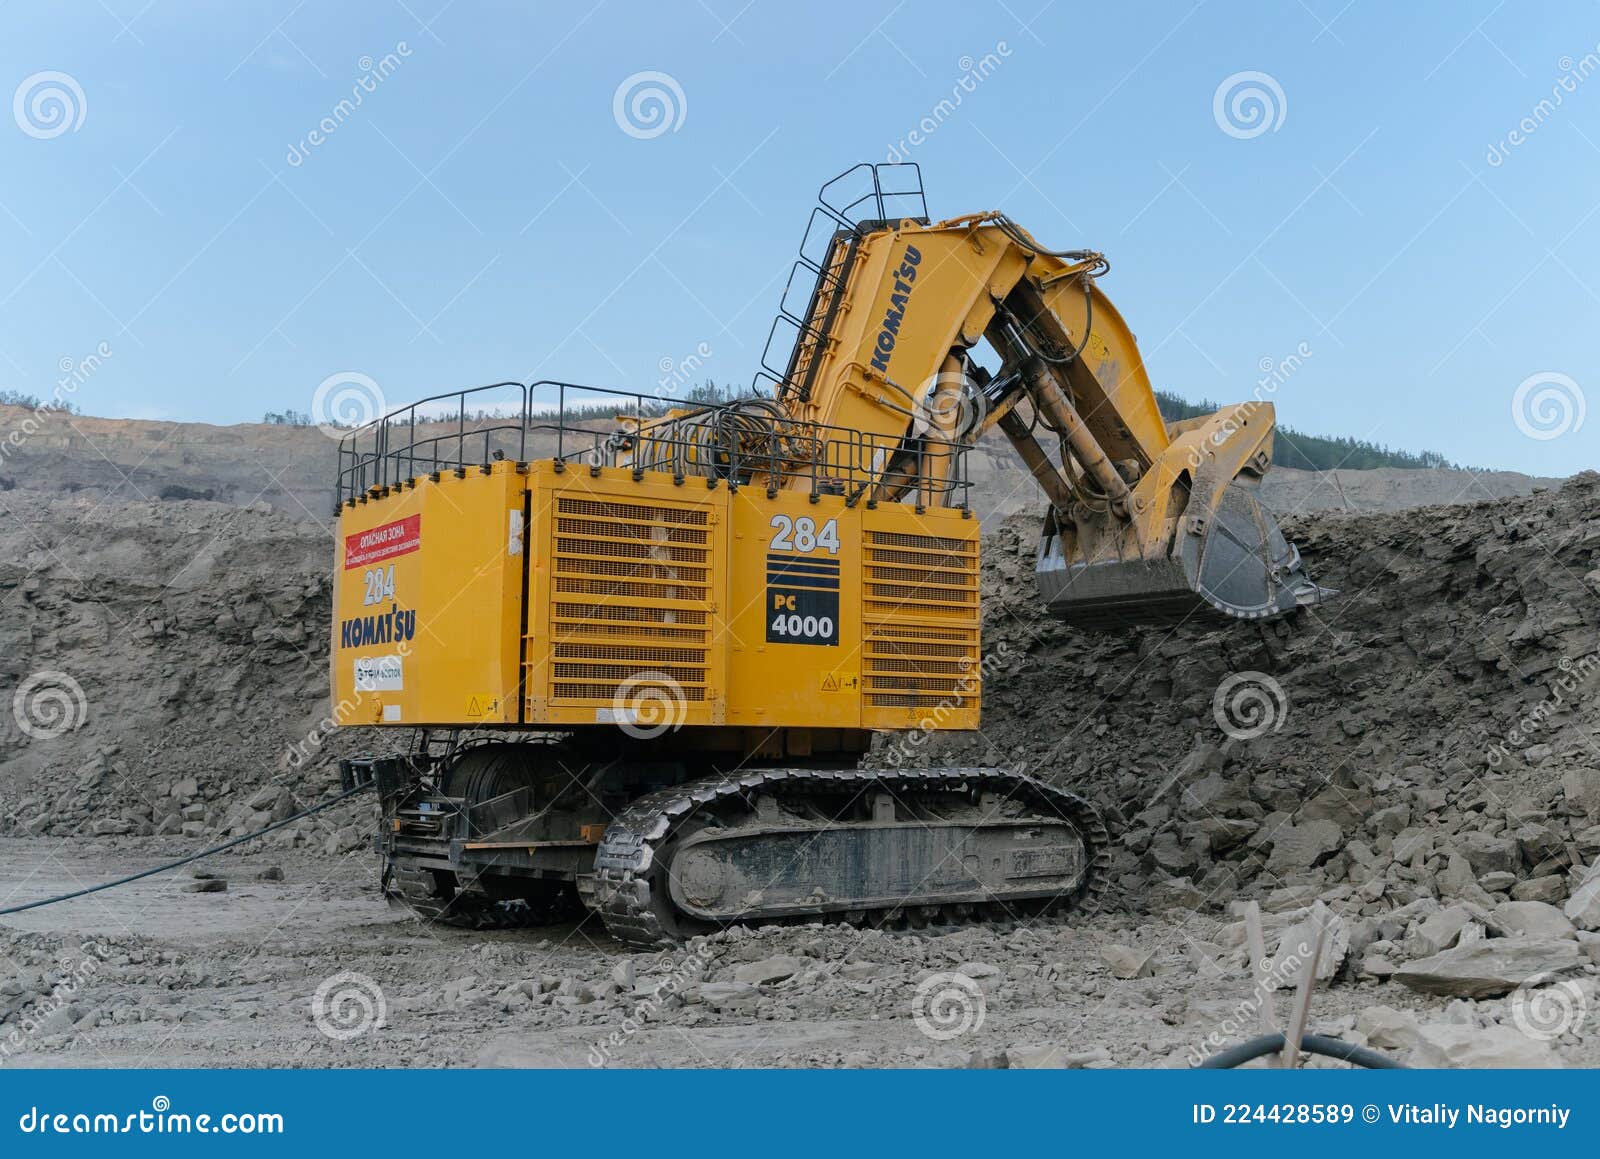 Komatsu Pc4000 Excavator At A Coal Mine The Action Takes Place In An Open Pit Editorial Stock Image Image Of Bucket Heavy